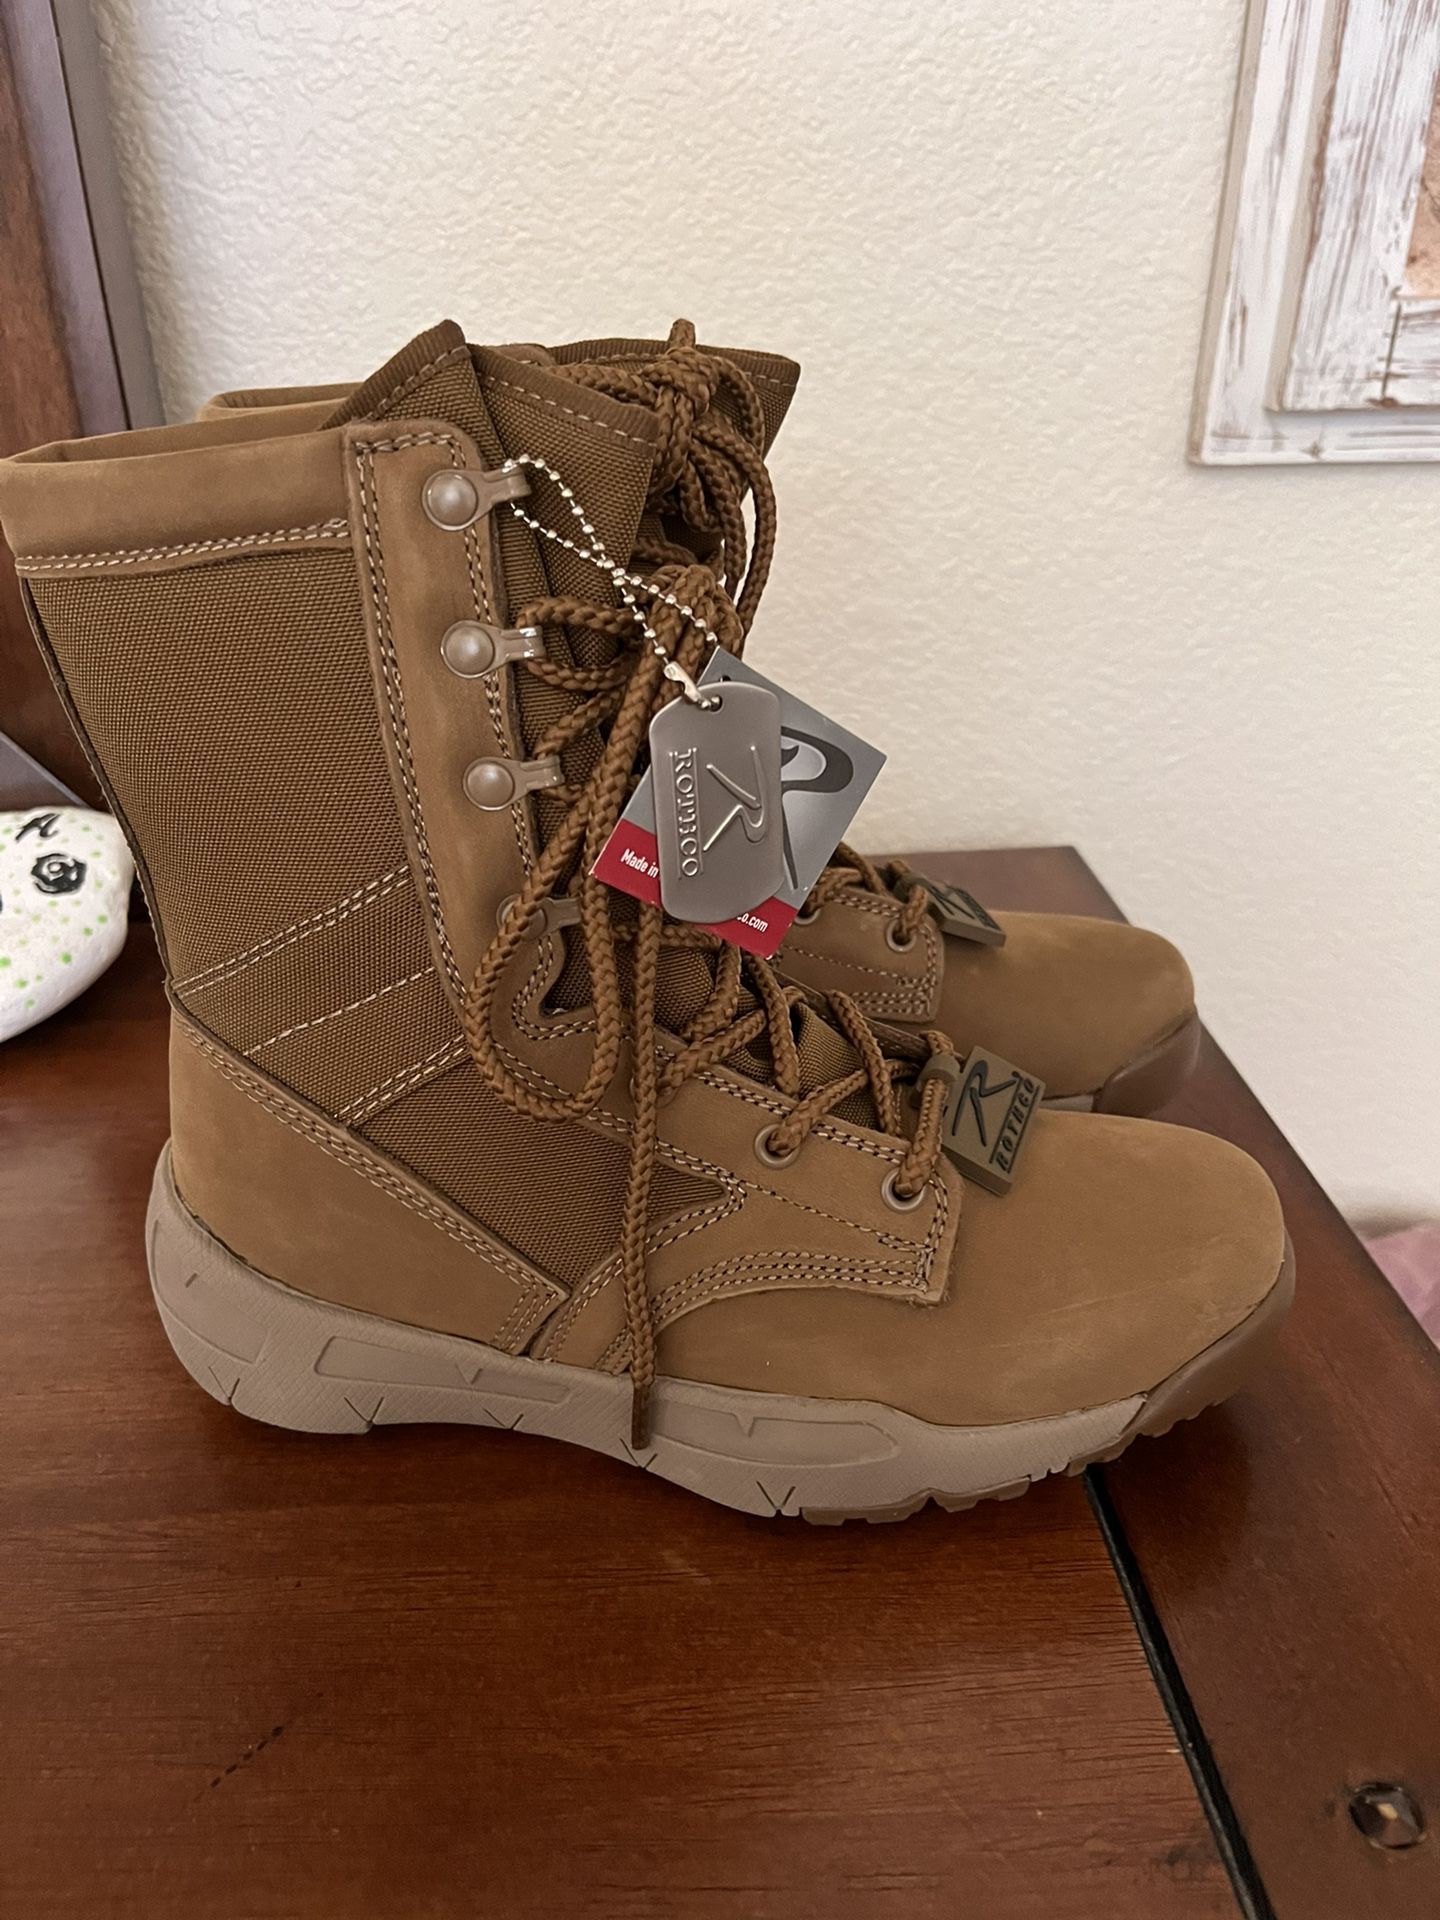 Military Tactical Waterproof Boots